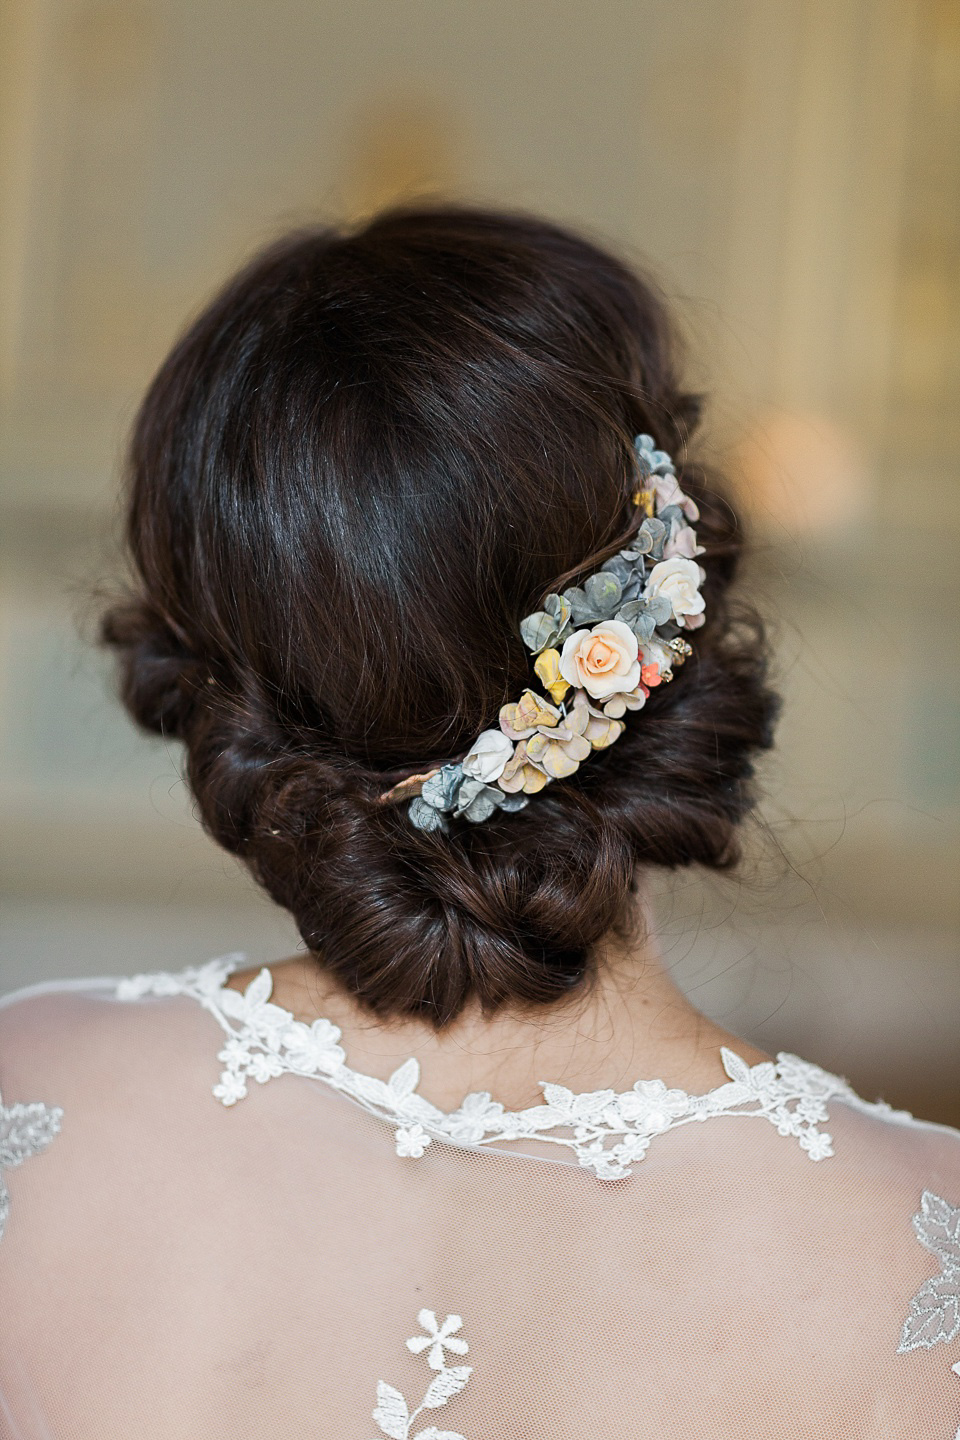 Lila accessories - shot on location at Fetcham Park by Katy Lunsford.